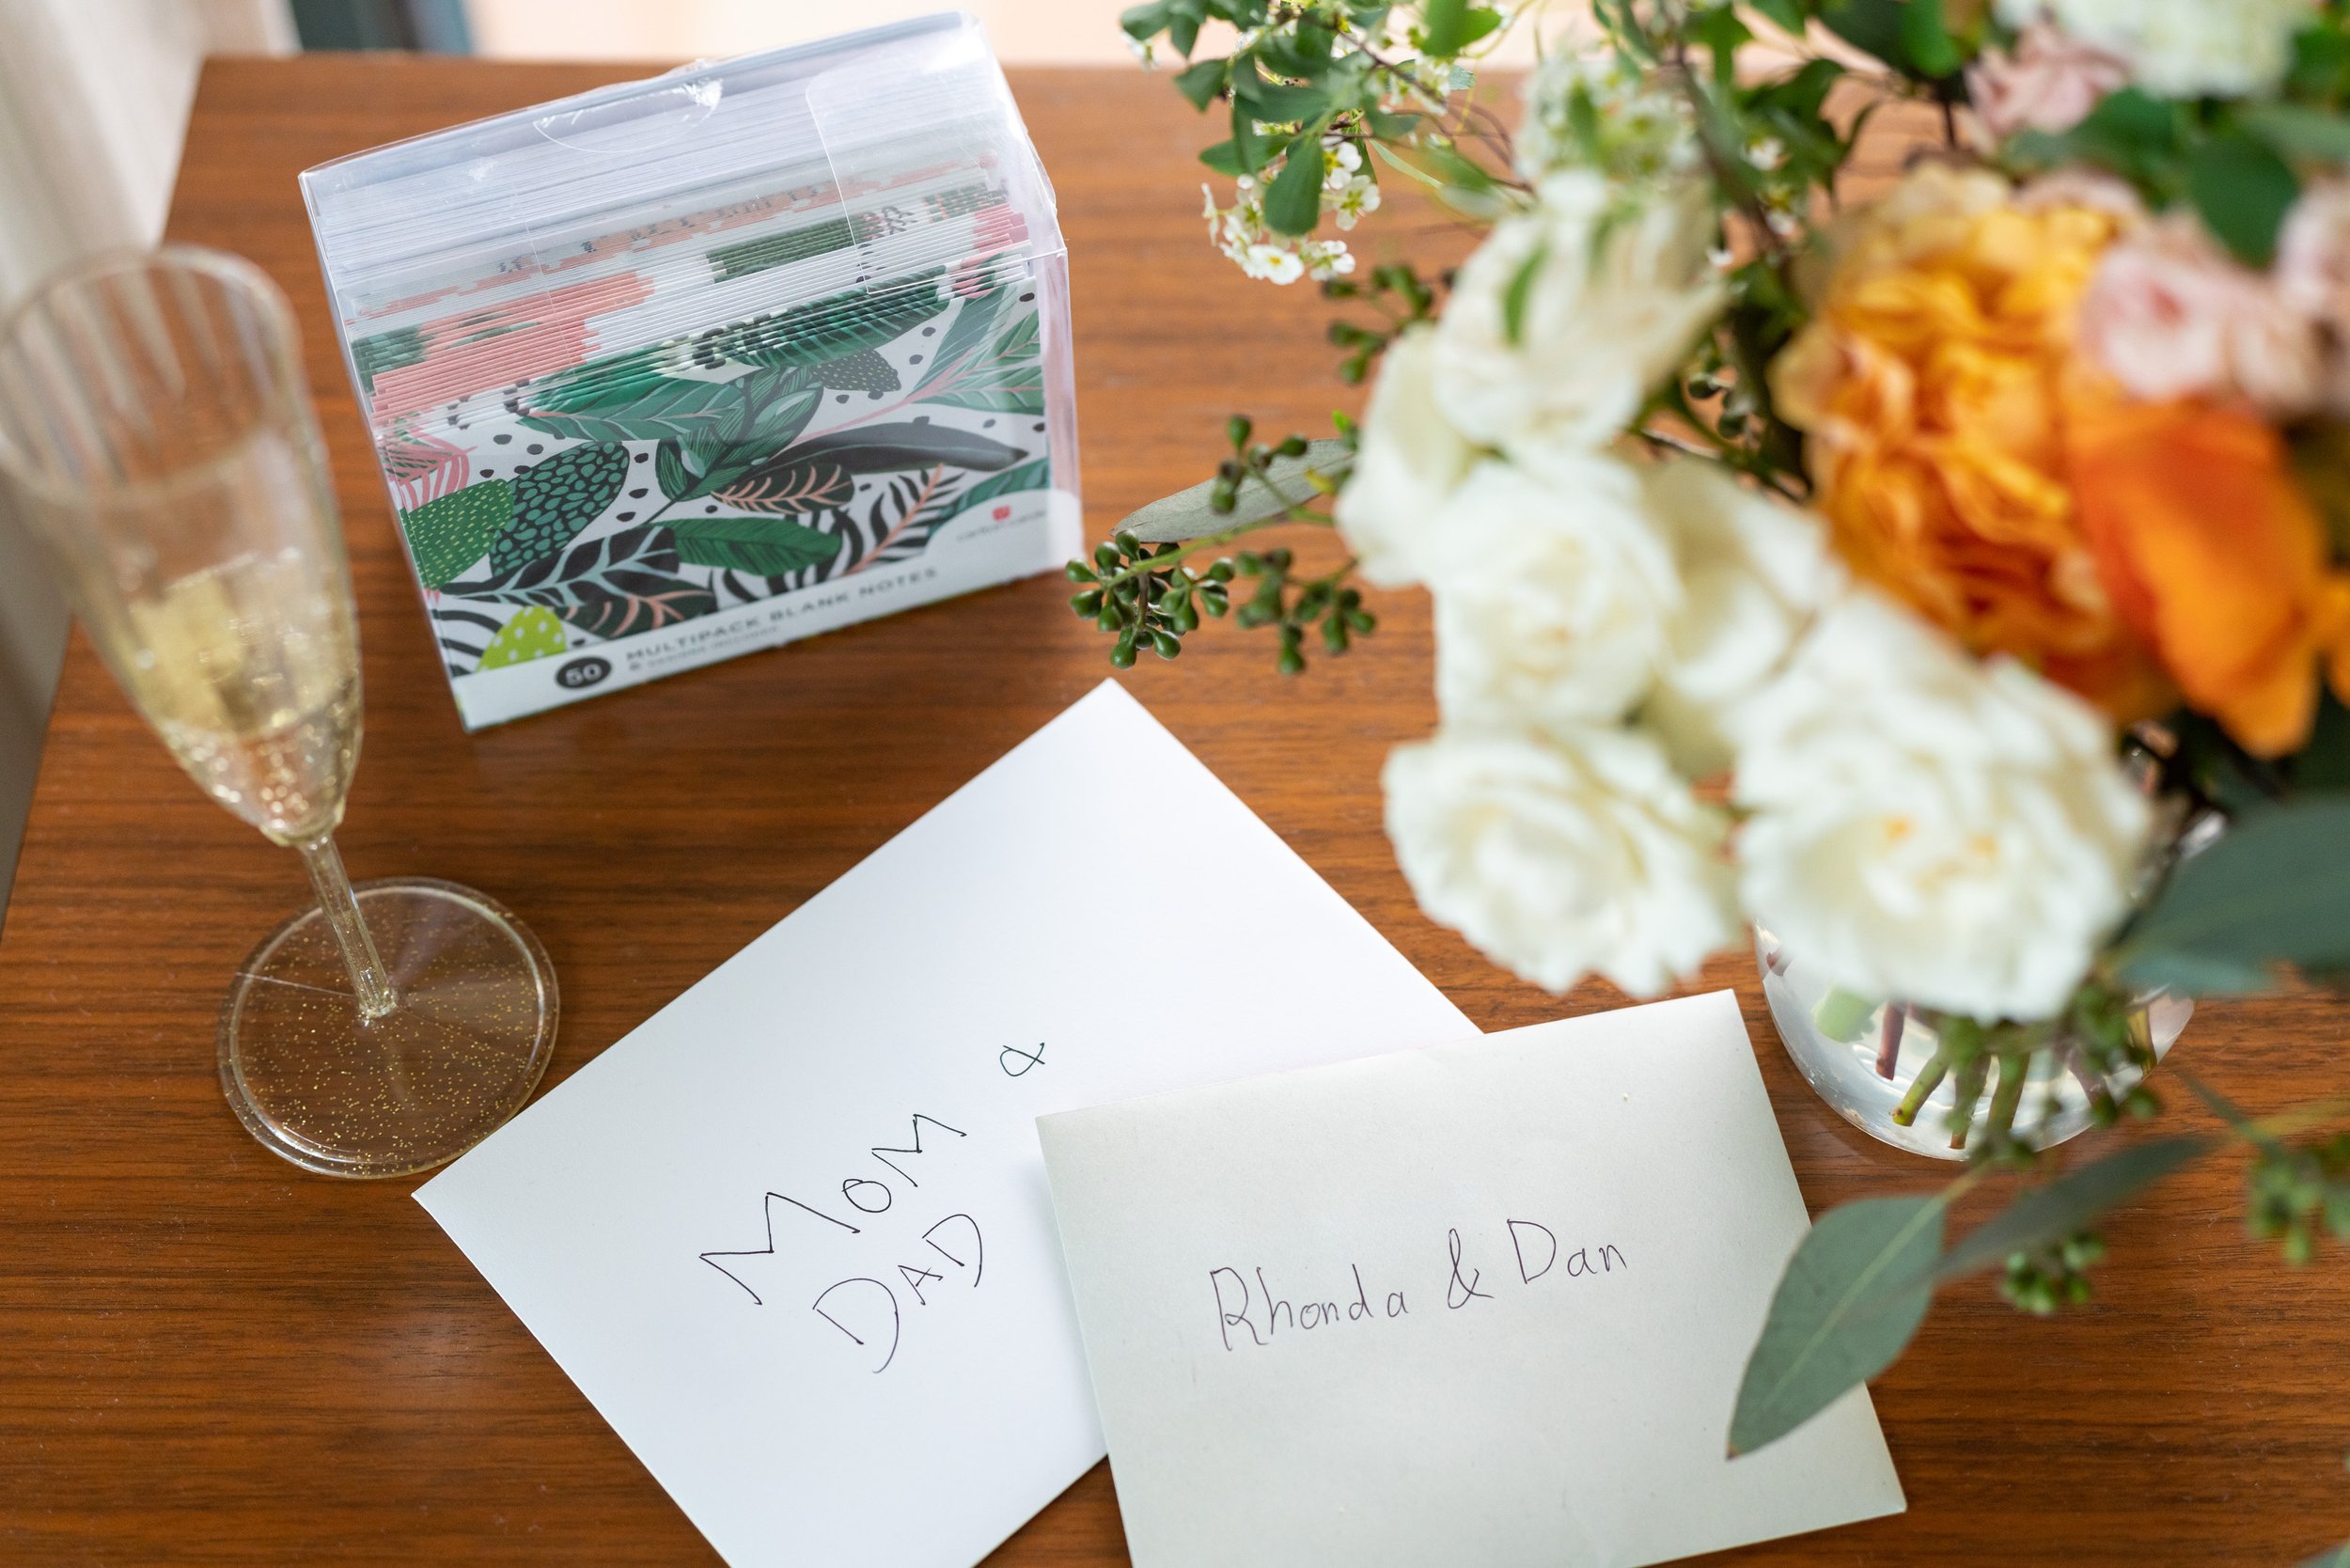 Handwritten cards for the bride and groom's parents at Lansdowne Resort